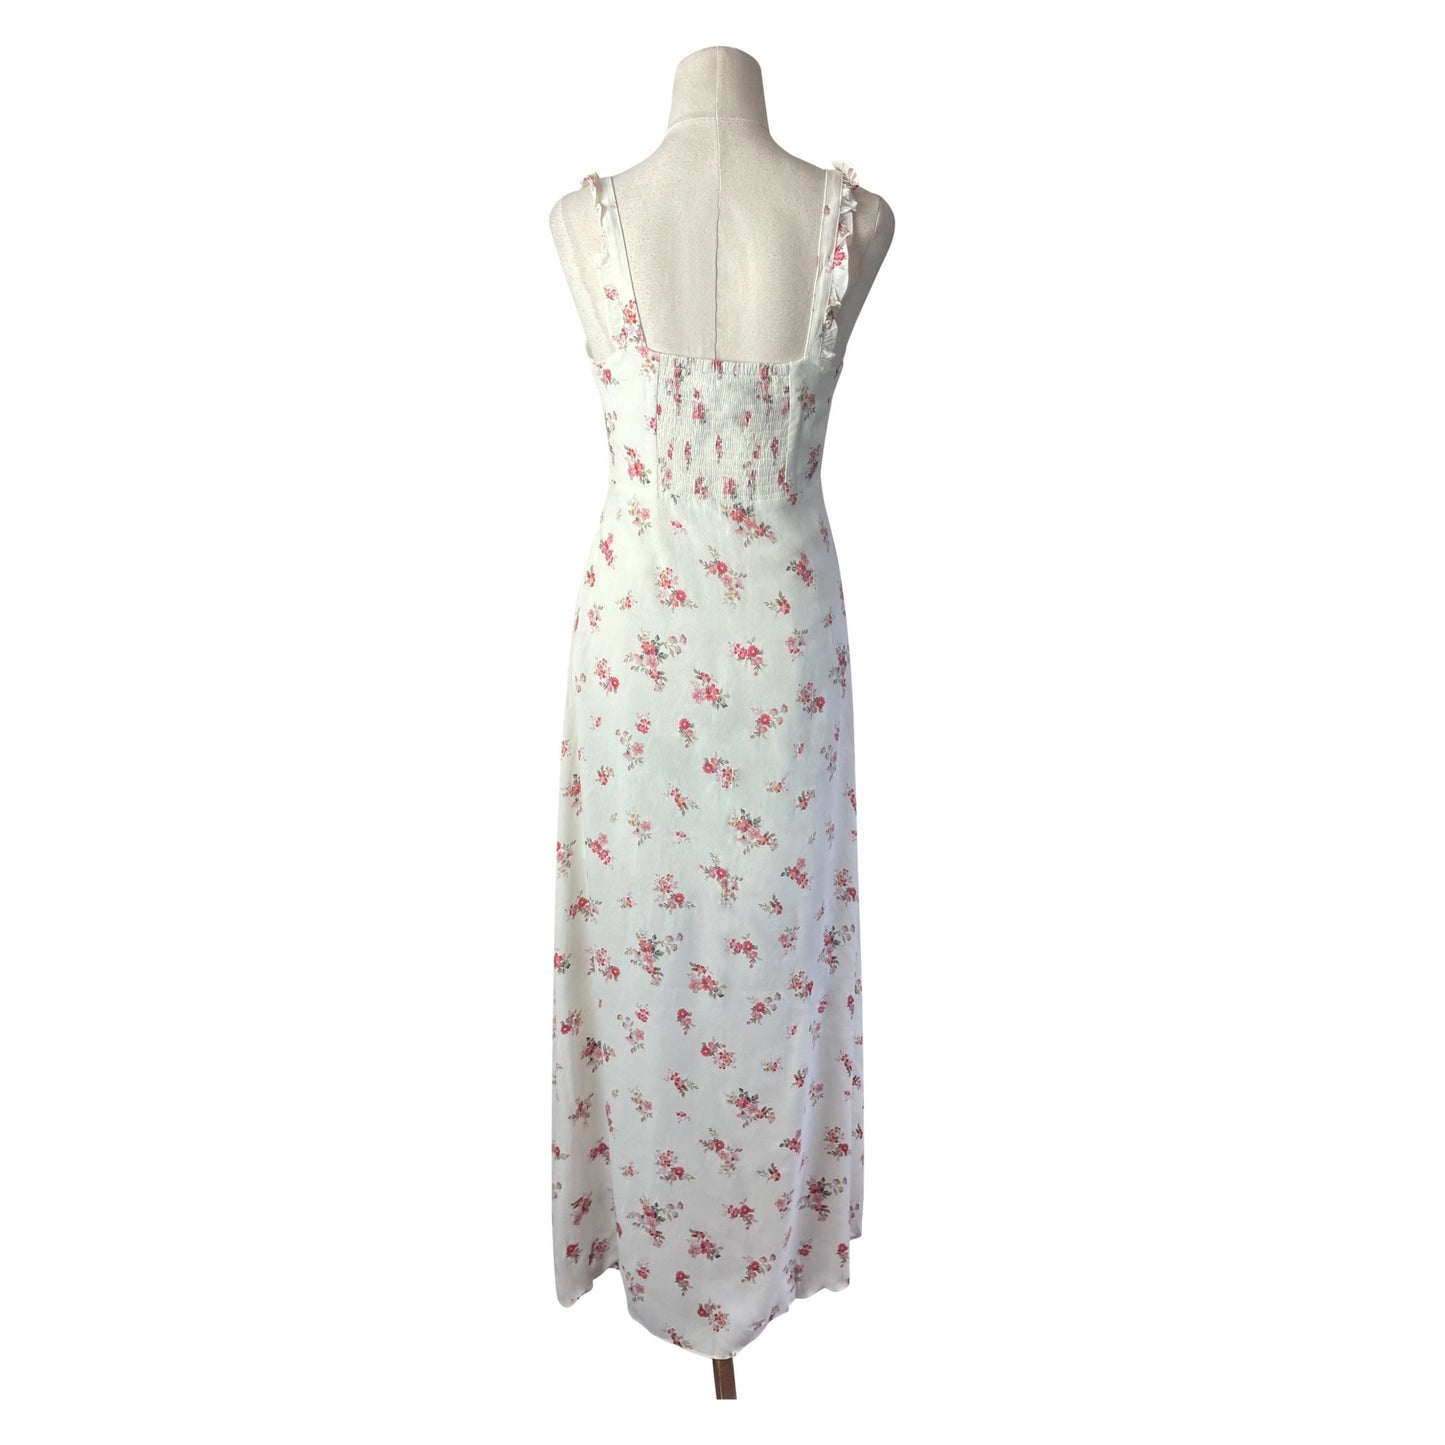 NEW - Forever New petite white dress w/ floral pattern | size 8 | RRP $149.99